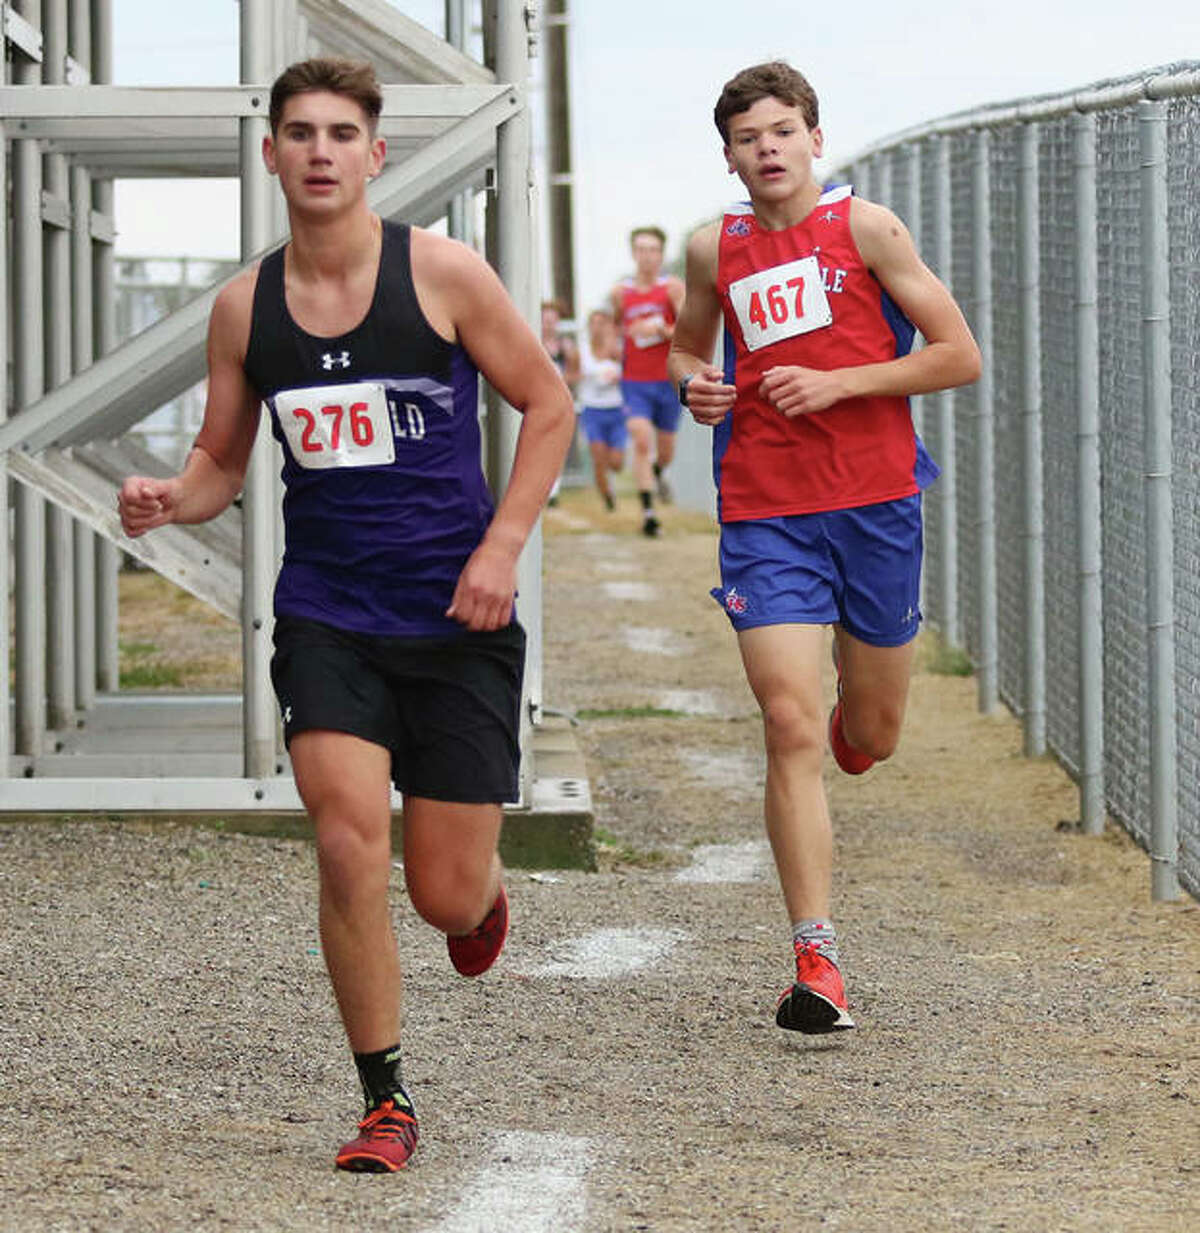 Litchfield’s Camden Quarton (left) and Carlinville’s Will Meyer run the narrow path behind the bleachers at Southwestern’s football field Monday during the SCC Meet in Piasa. Quarton and Meyer held those positions in the final mile to finish second and third, respectively.